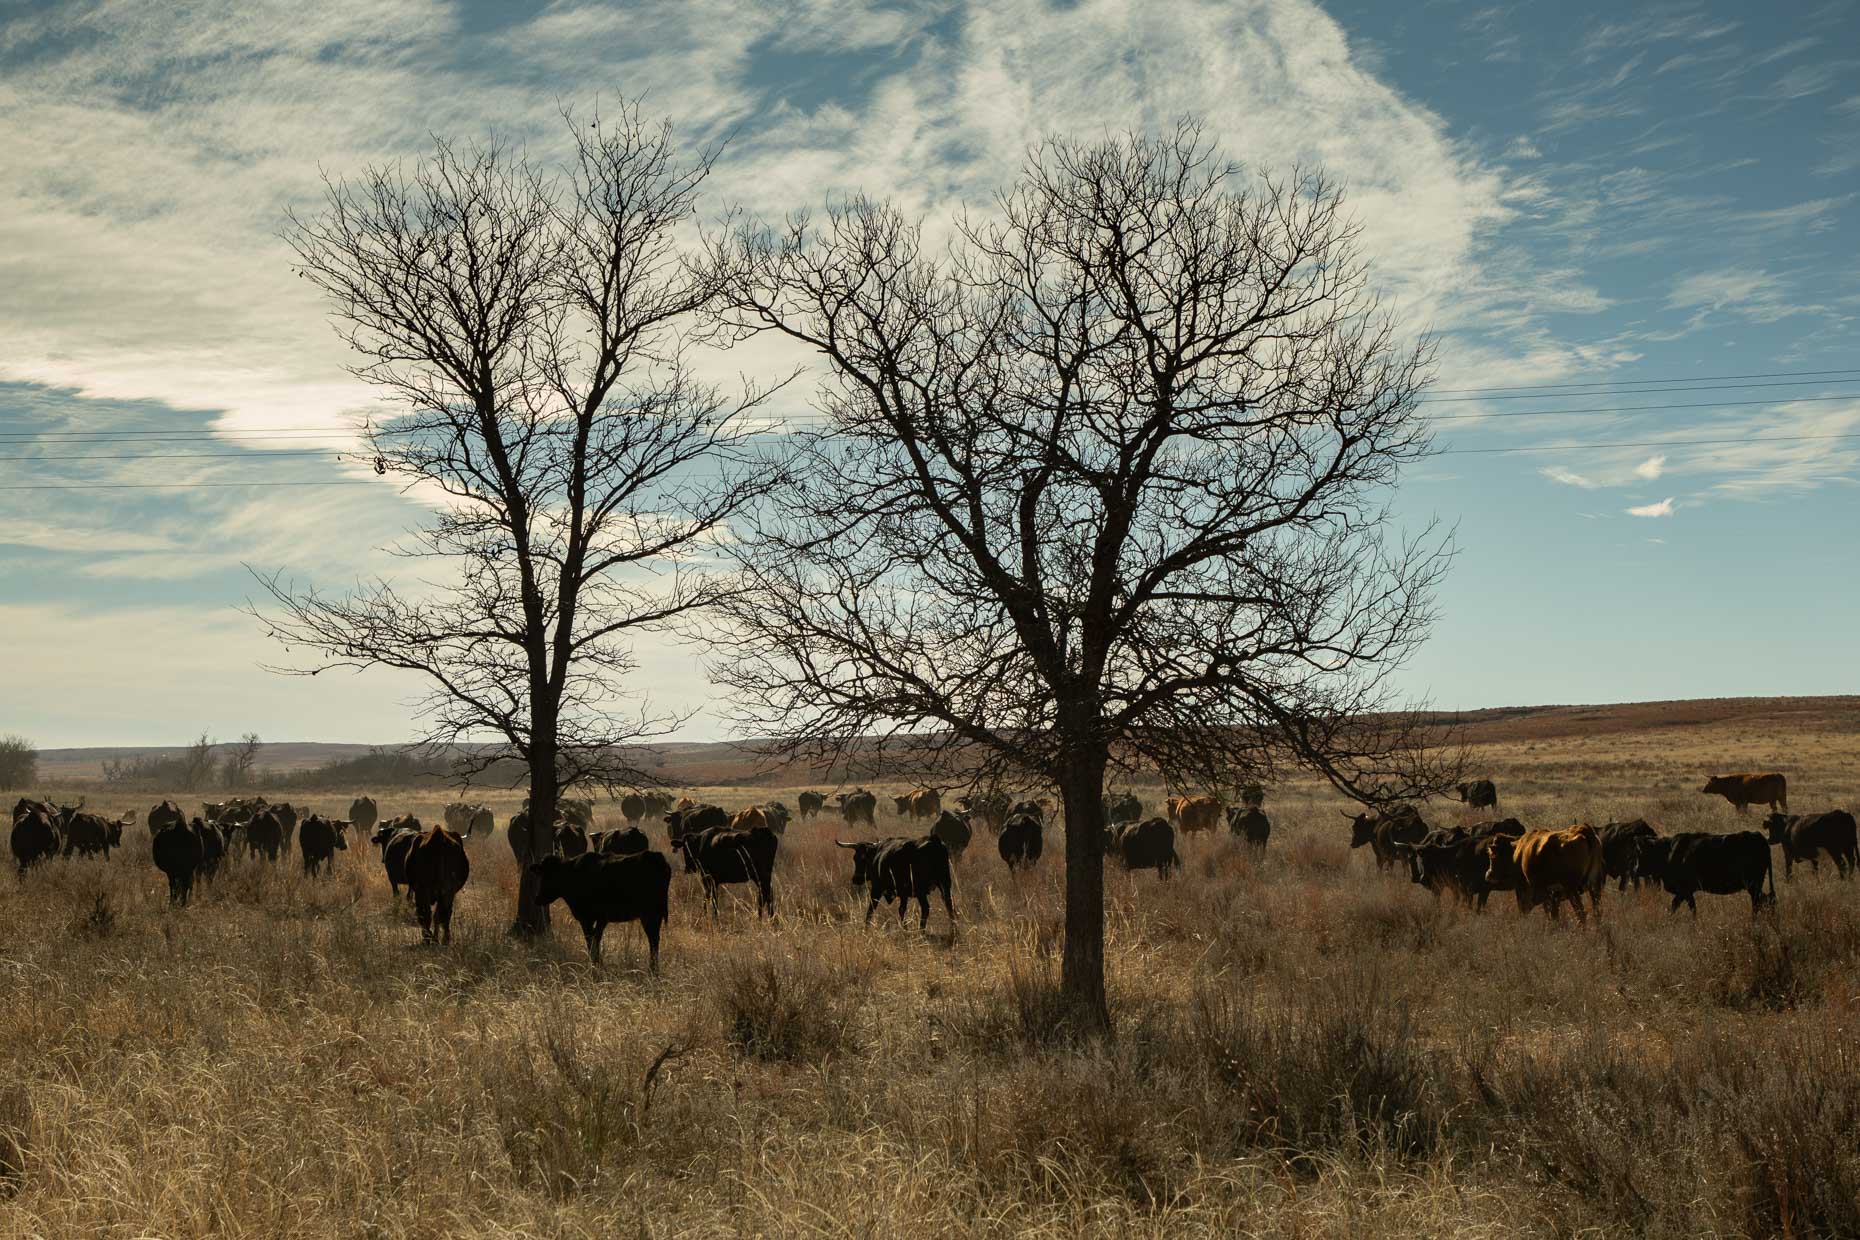 Corriente cattle scatter to pasture after intensive foraging on a farm in Canadian, Texas. Brett Deering Photography for The New York Times